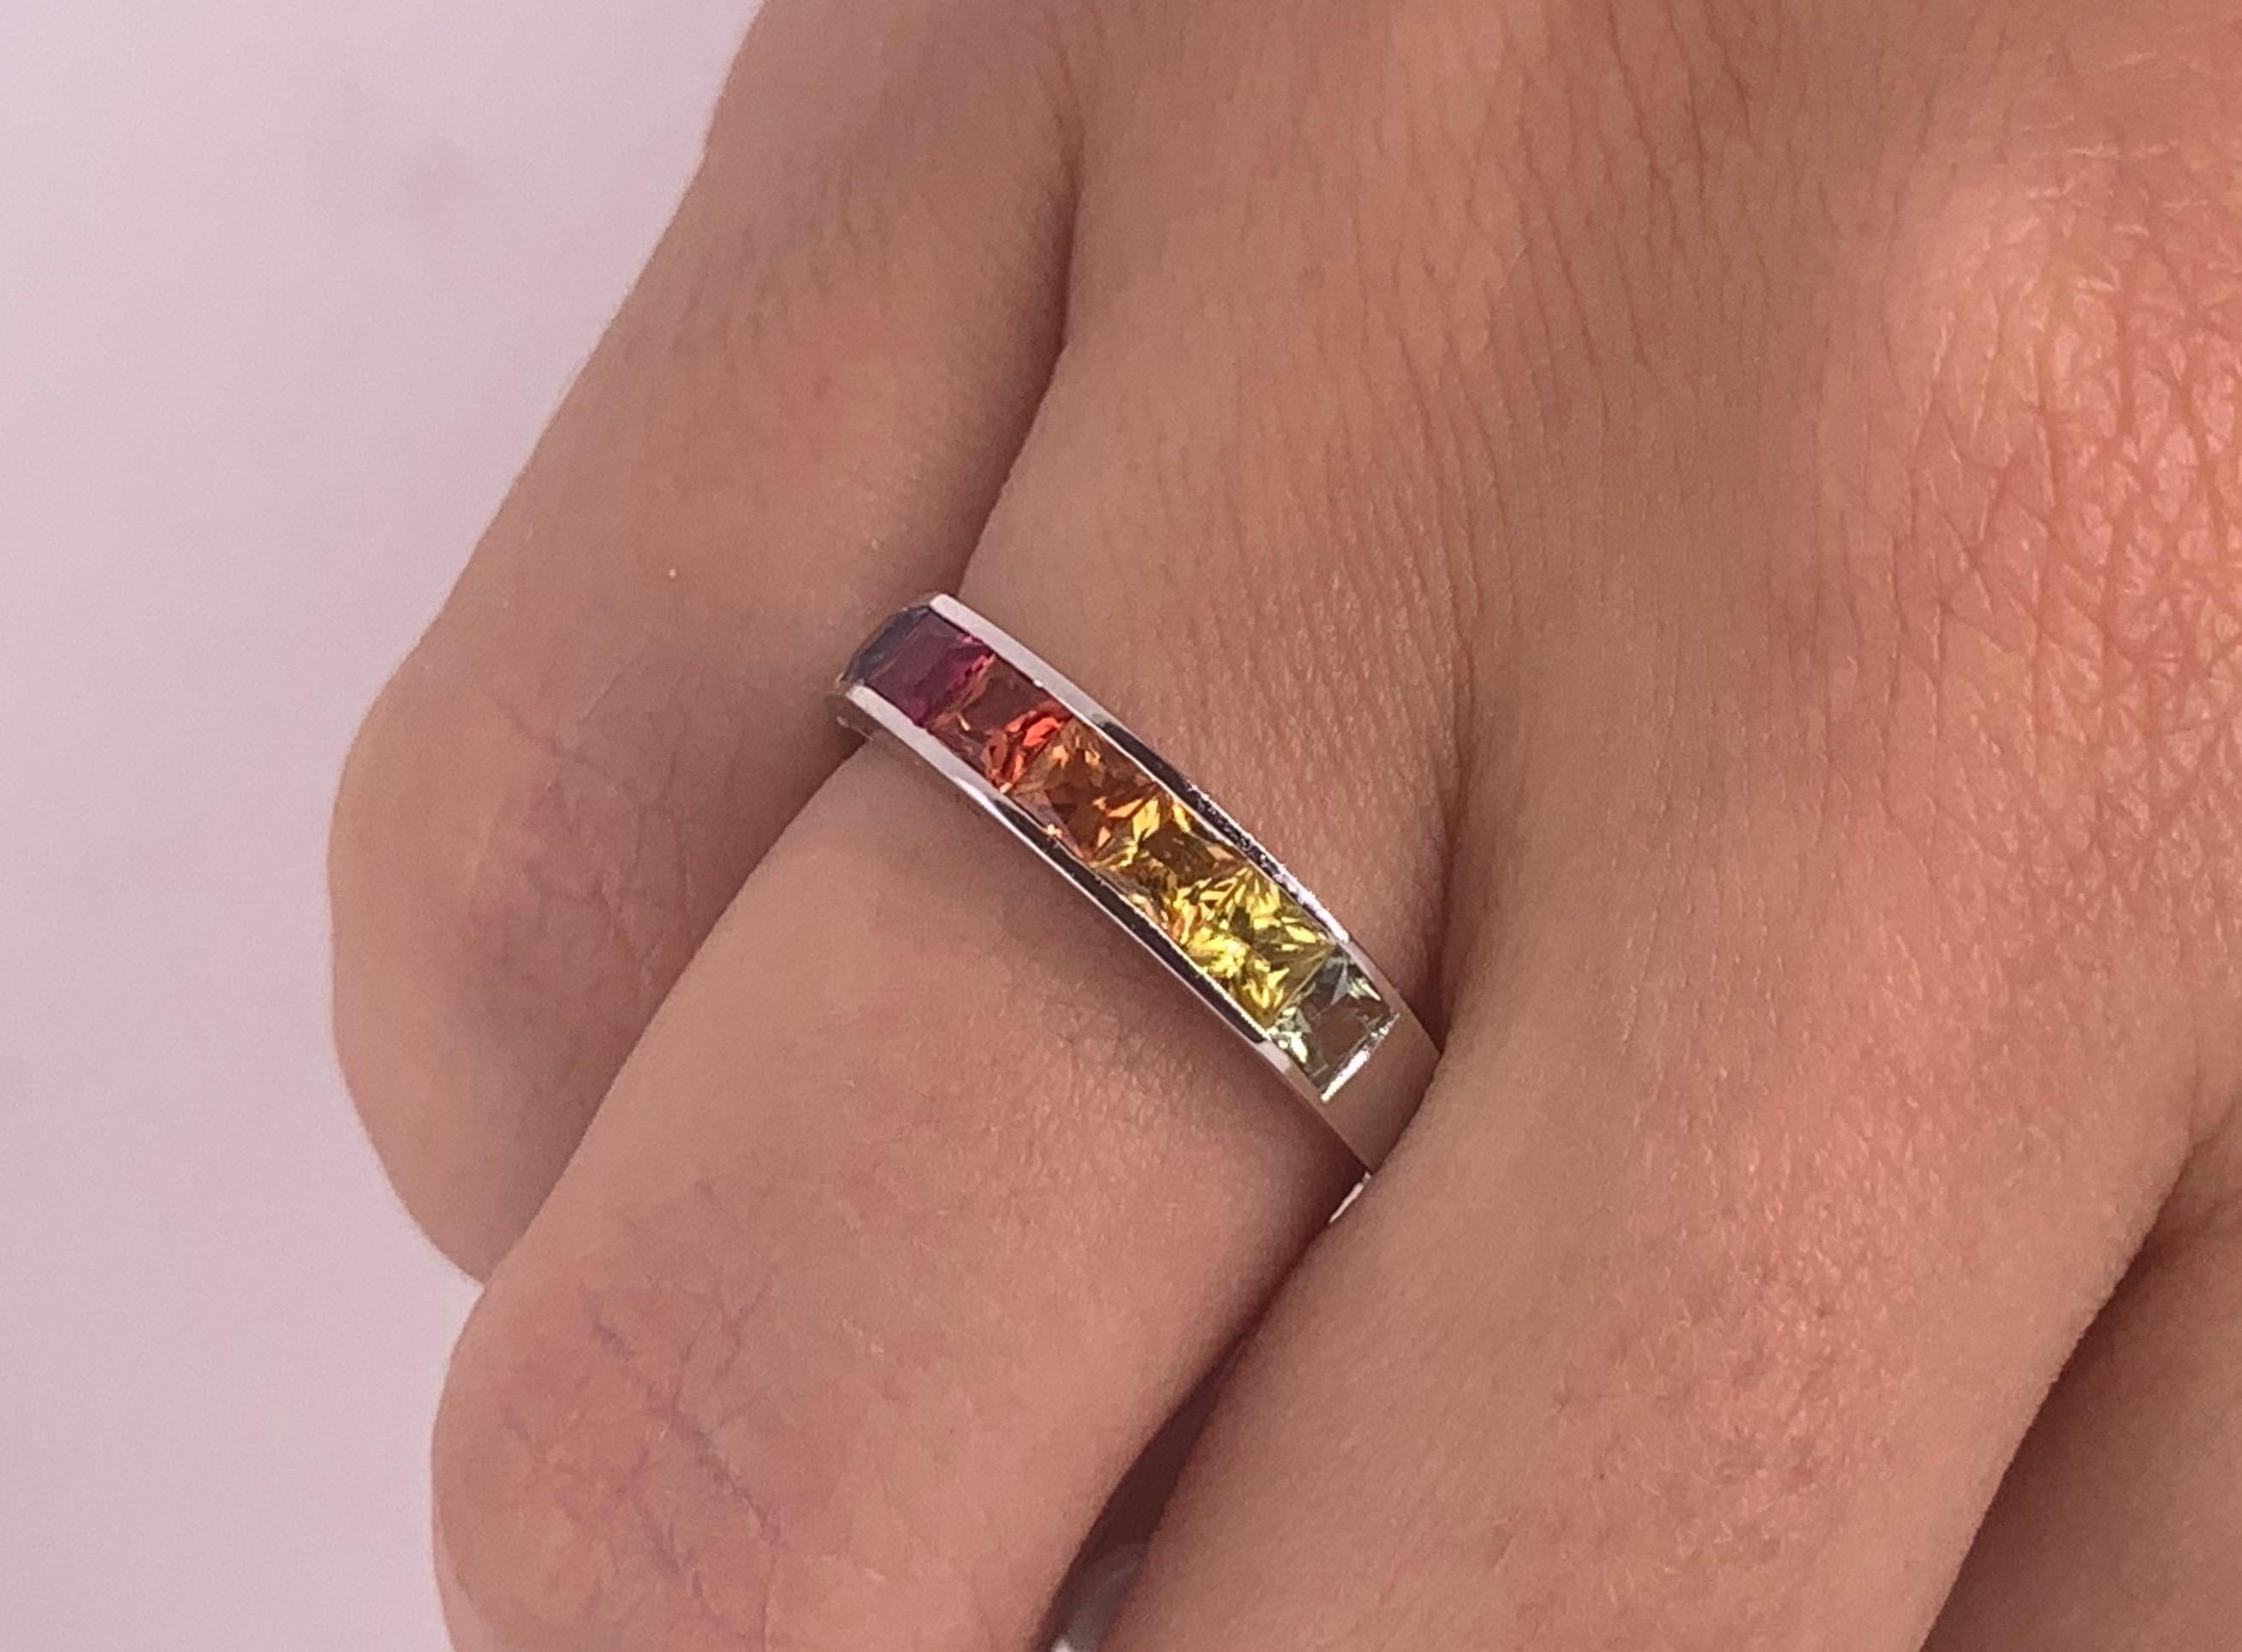 Material: 14k White Gold 
Stone Details:  7 Princess Cut Multicolor Sapphires - at 1.43 Carats - Blue, Pink, Red, Green, Yellow

Alberto offers complimentary sizing on all rings.

Fine one-of-a-kind craftsmanship meets incredible quality in this